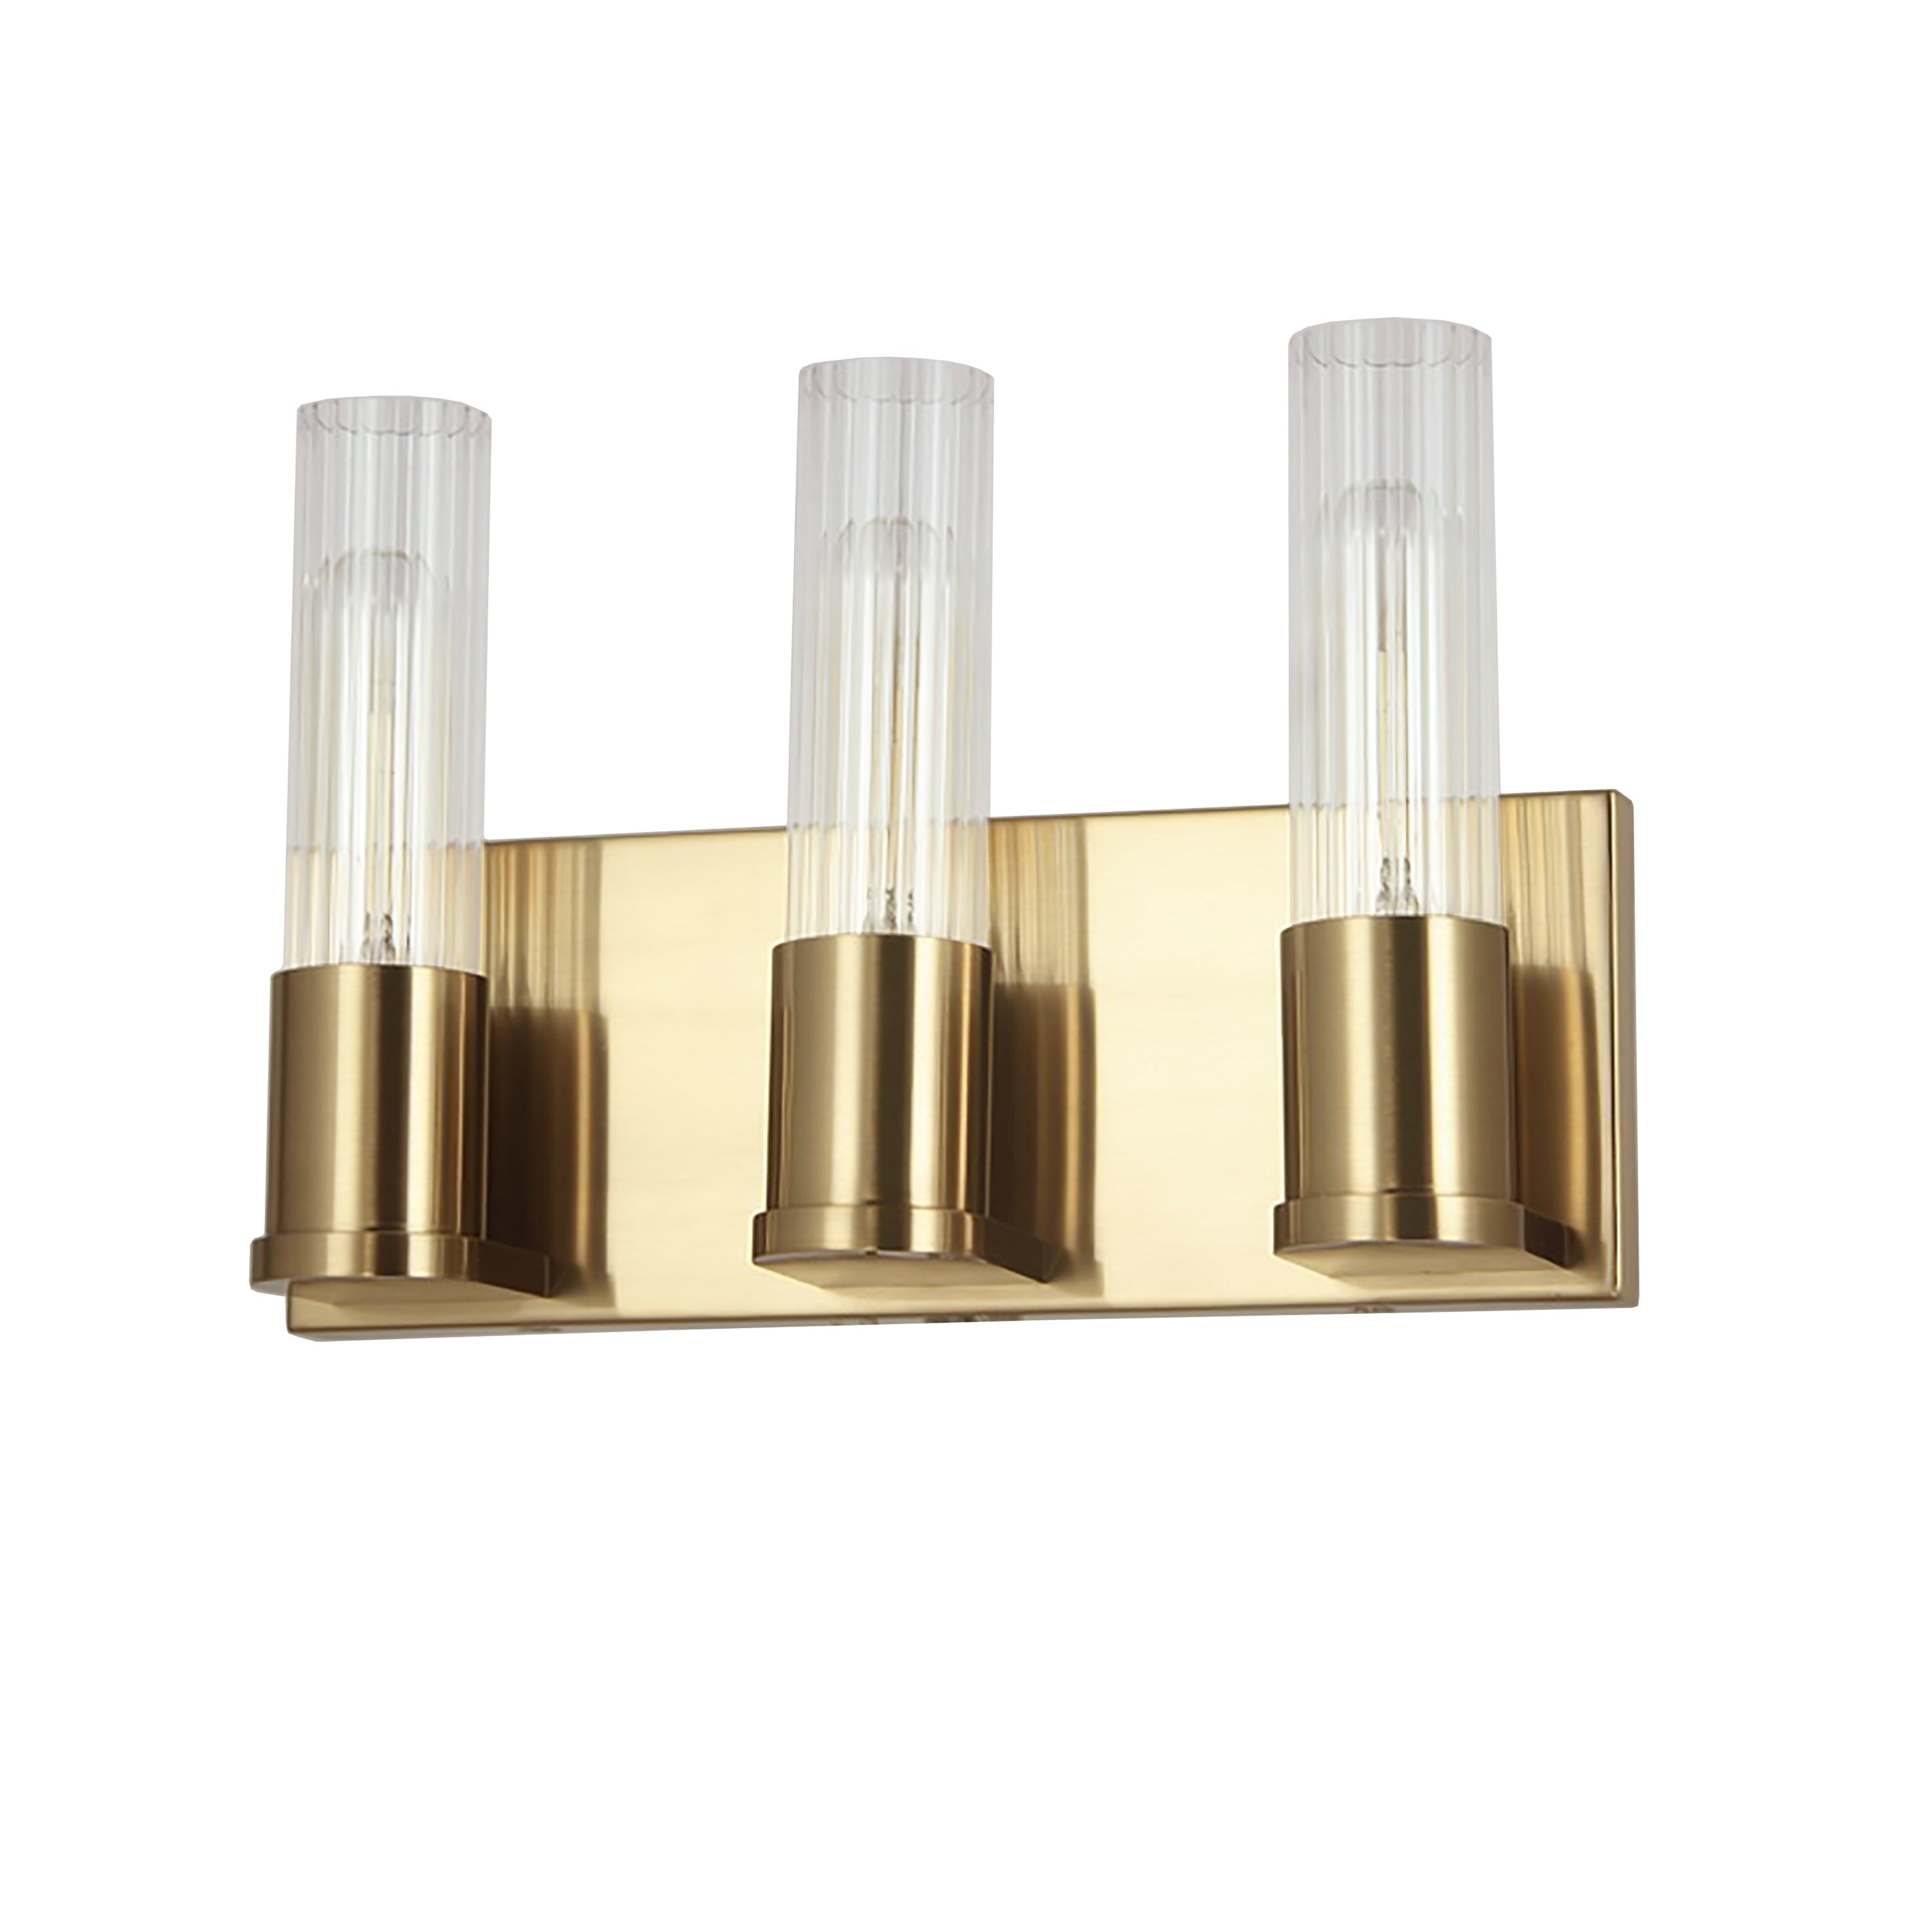 Dainolite Tube - TBE-123W-AGB - 3 Light Vanity Fixture, Aged Brass w/ Clear Fluted Glass - Aged Brass